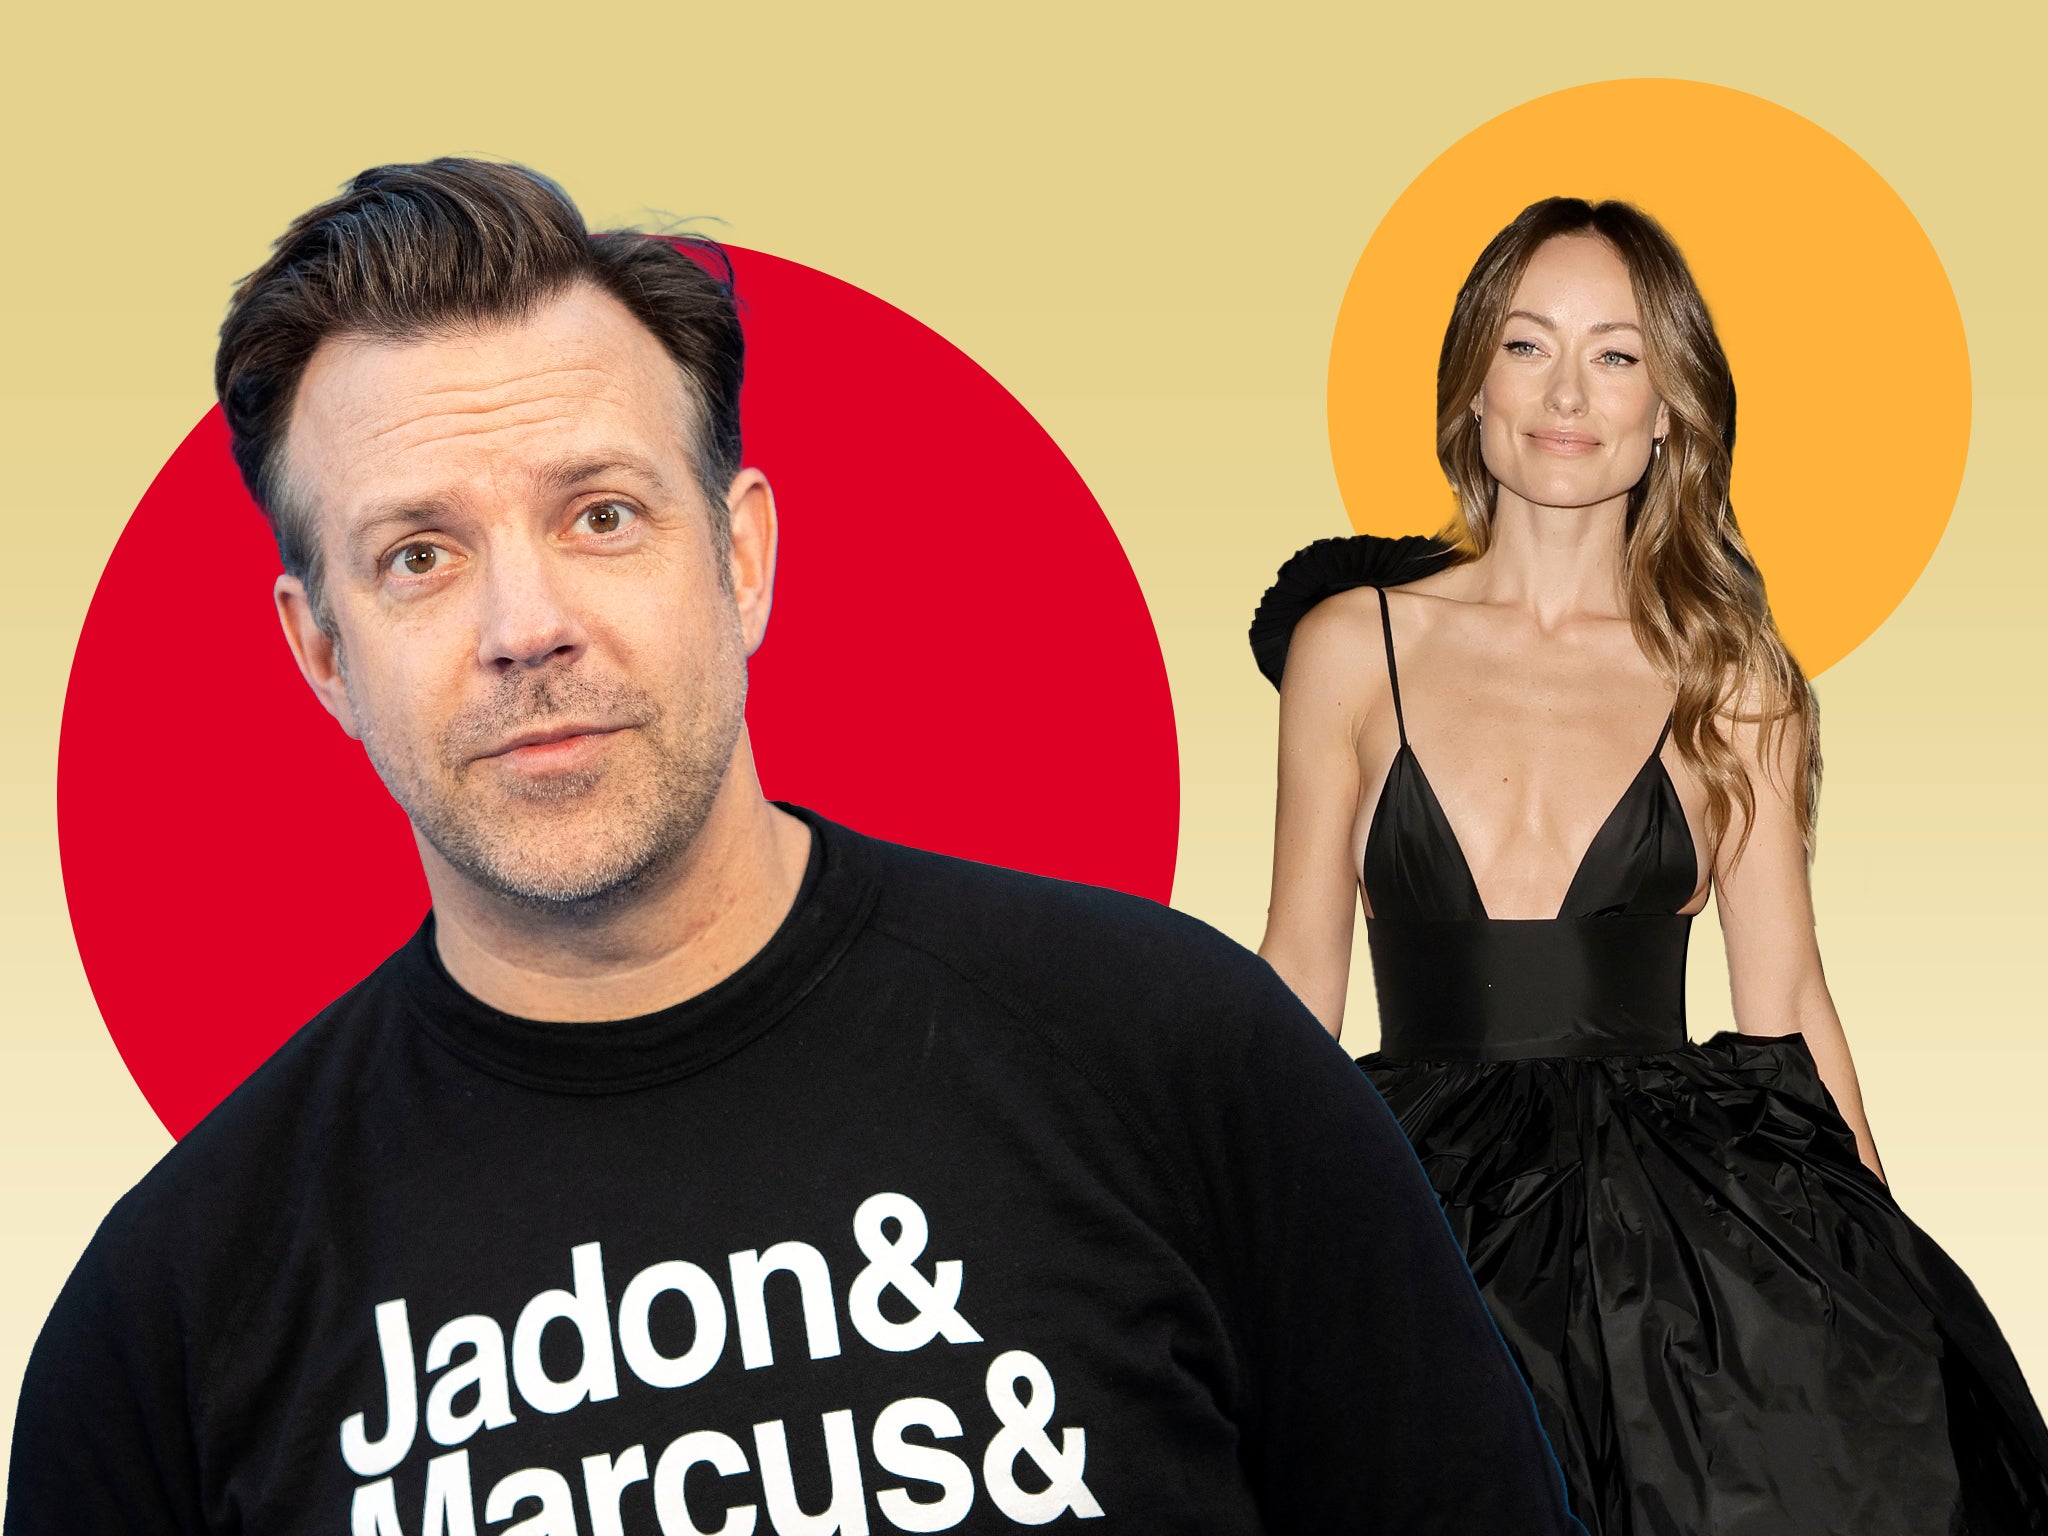 Amid their former nanny’s allegations, Jason Sudeikis and Olivia Wilde came together to issue a rare joint statement